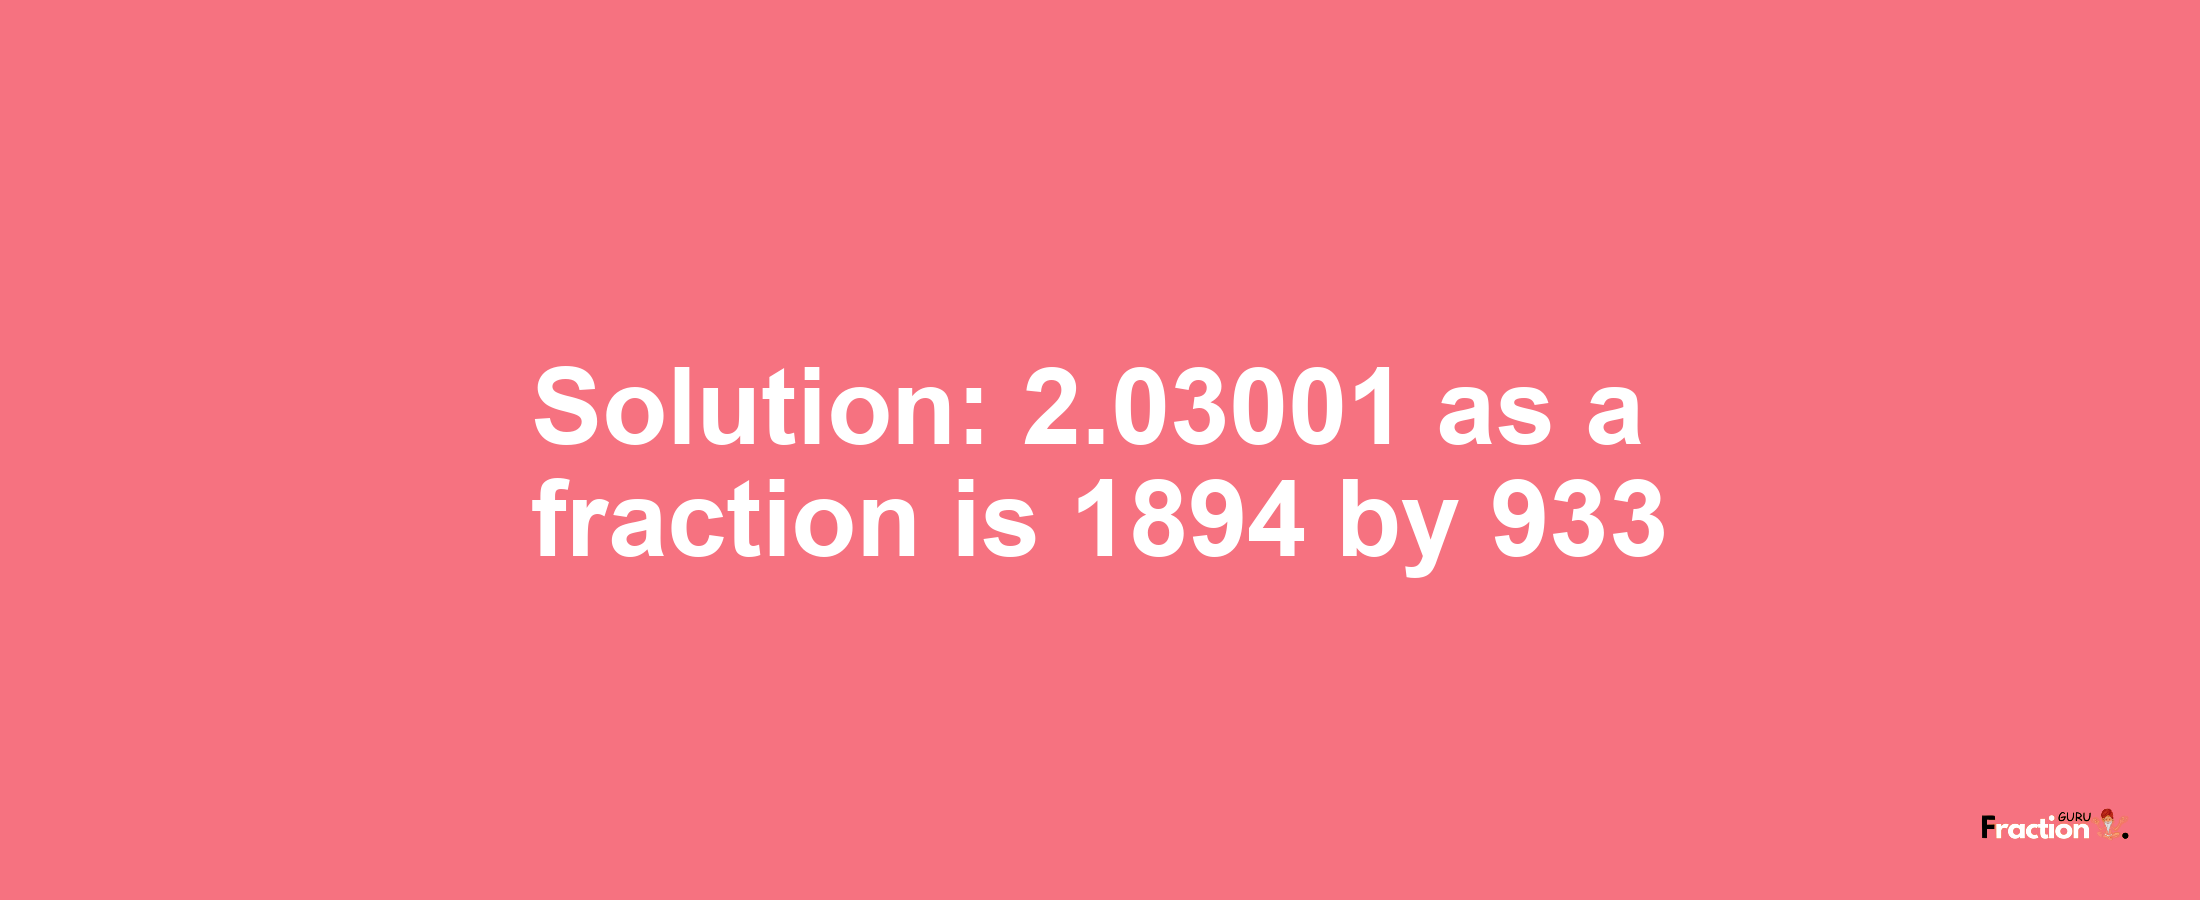 Solution:2.03001 as a fraction is 1894/933